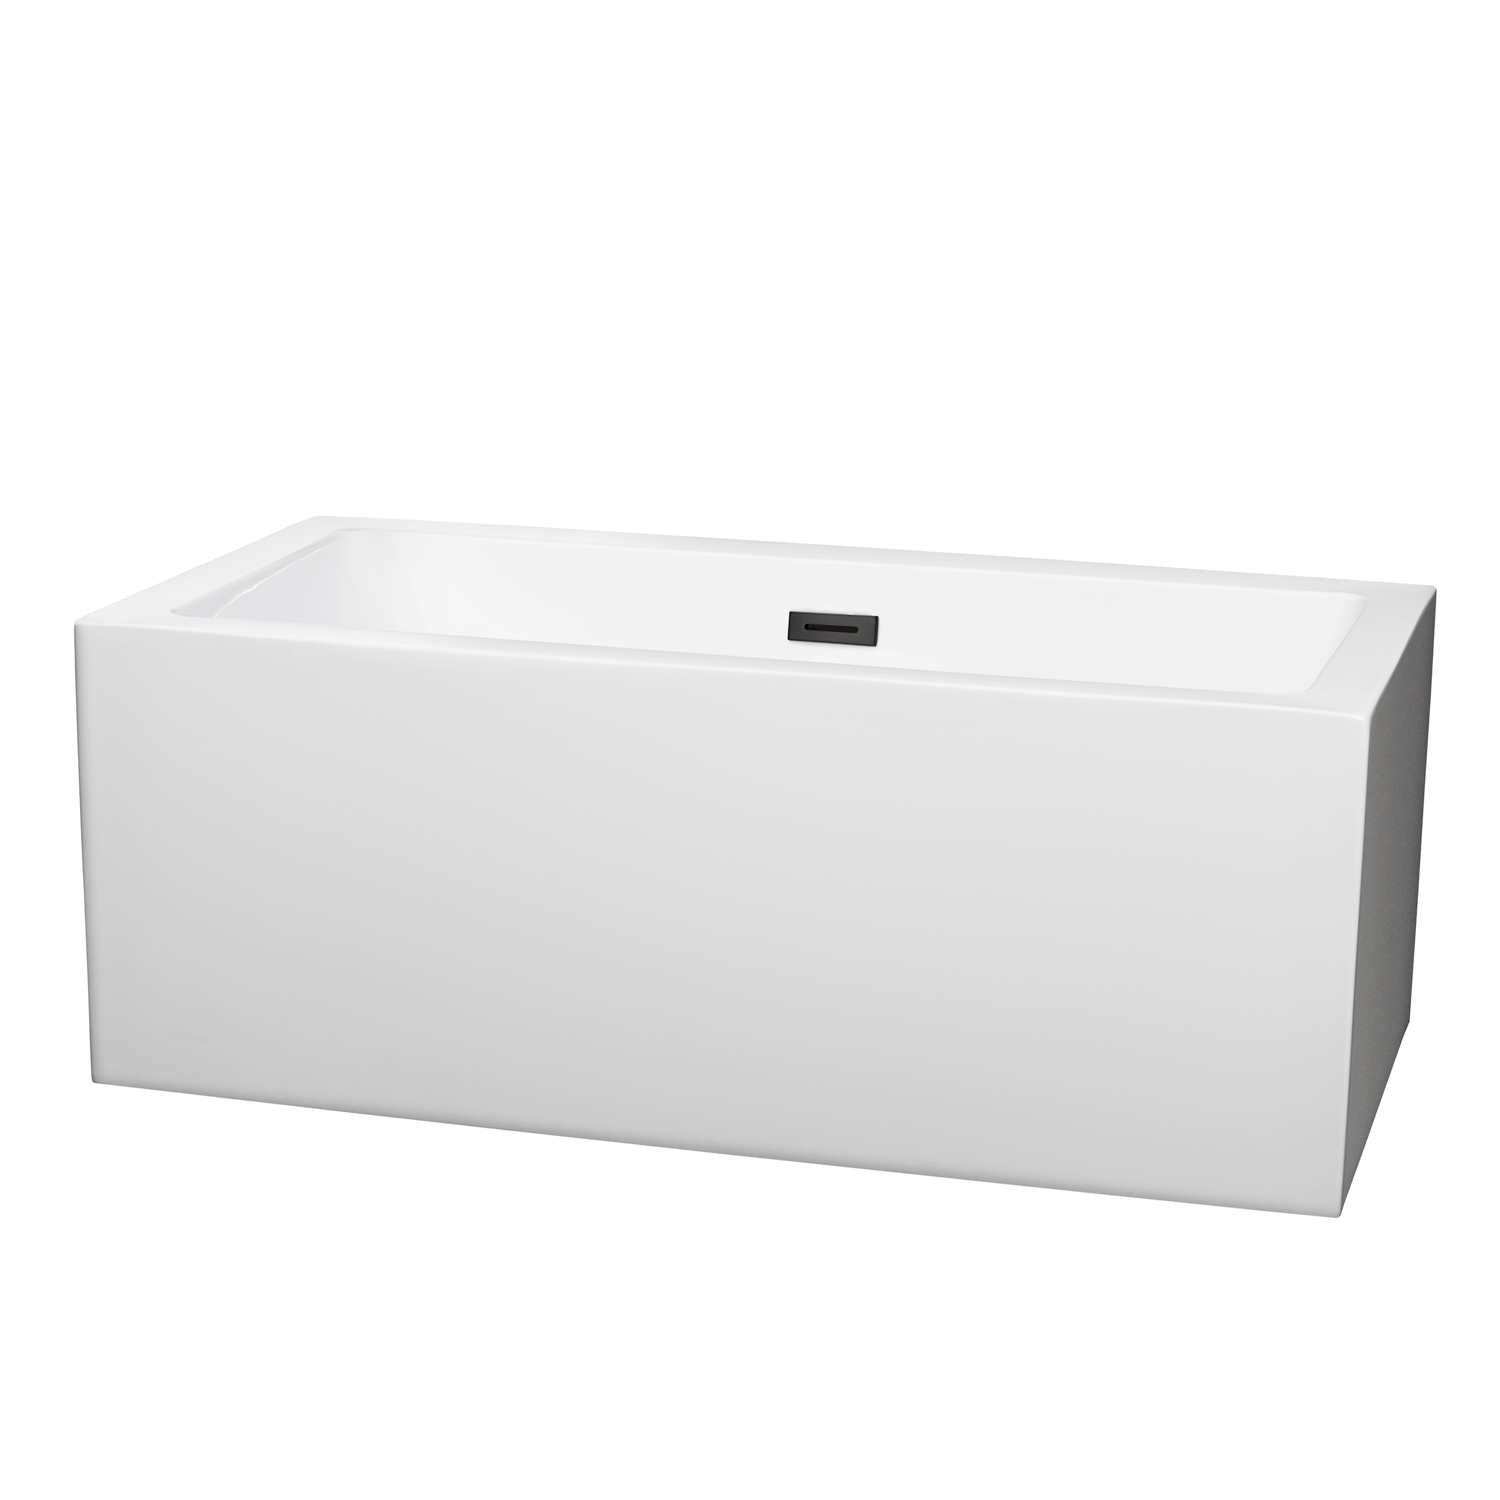 60" Freestanding Bathtub in White Finish with Matte Black Drain and Overflow Trim